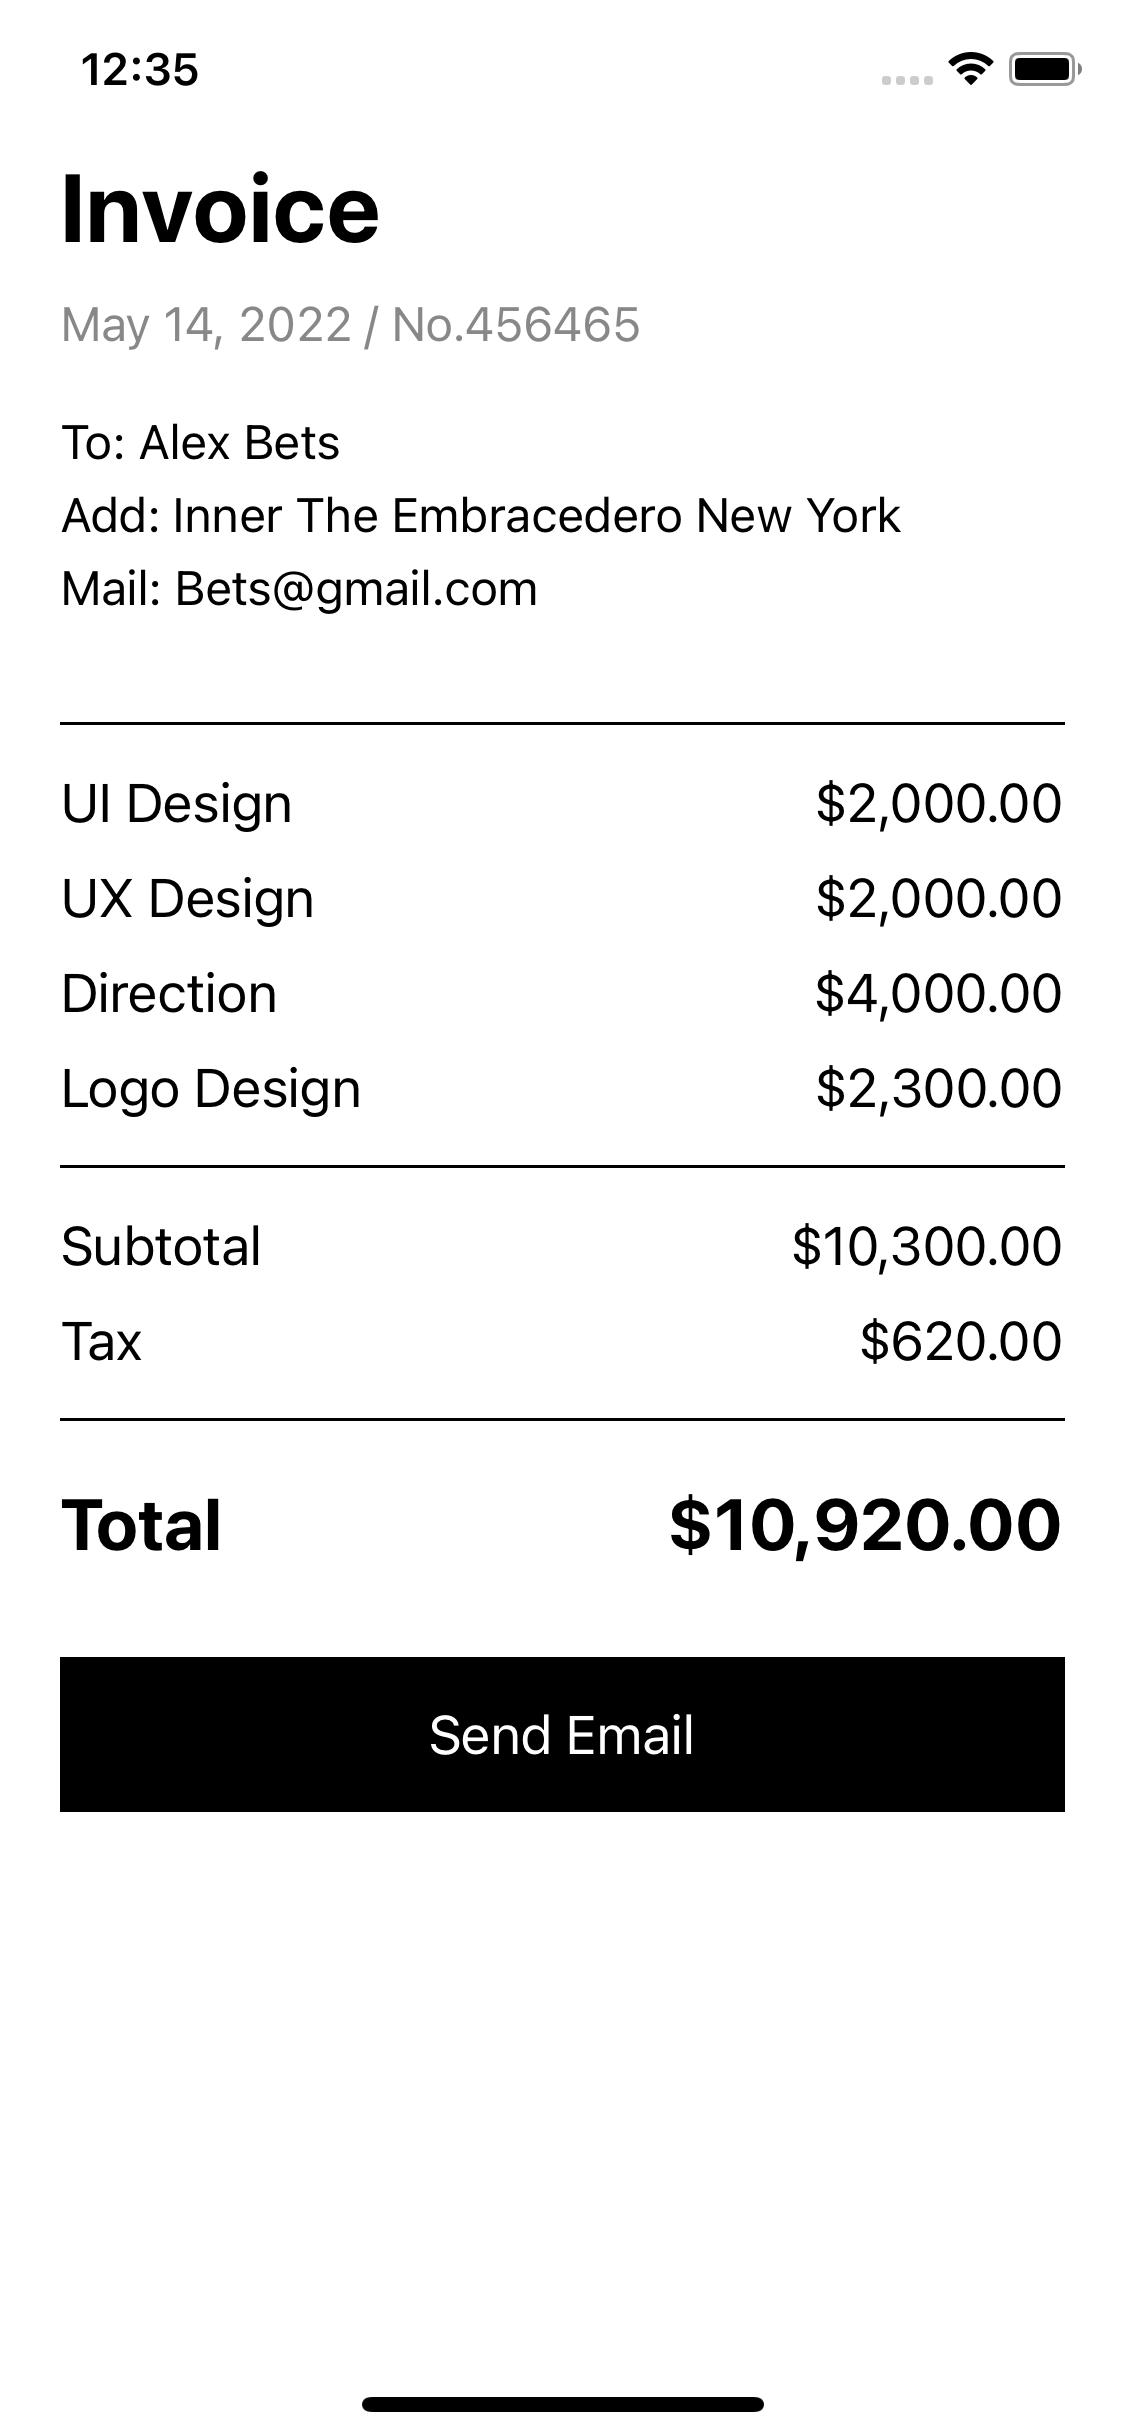 React native template. Invoice screen with taxes